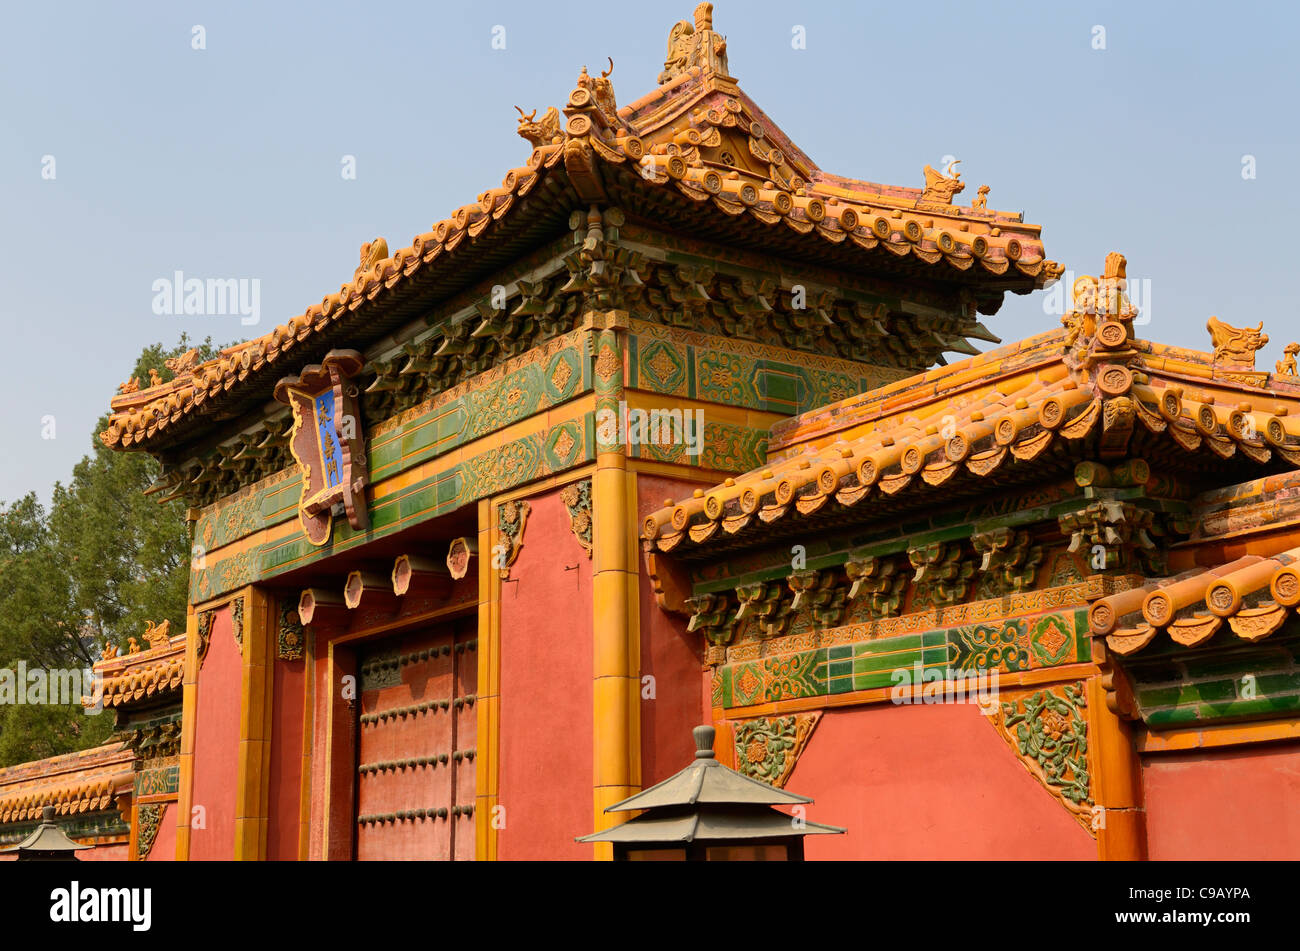 Ancient building in inner court decorated with gold and green tiles Forbidden City Beijing Peoples Republic of China Stock Photo